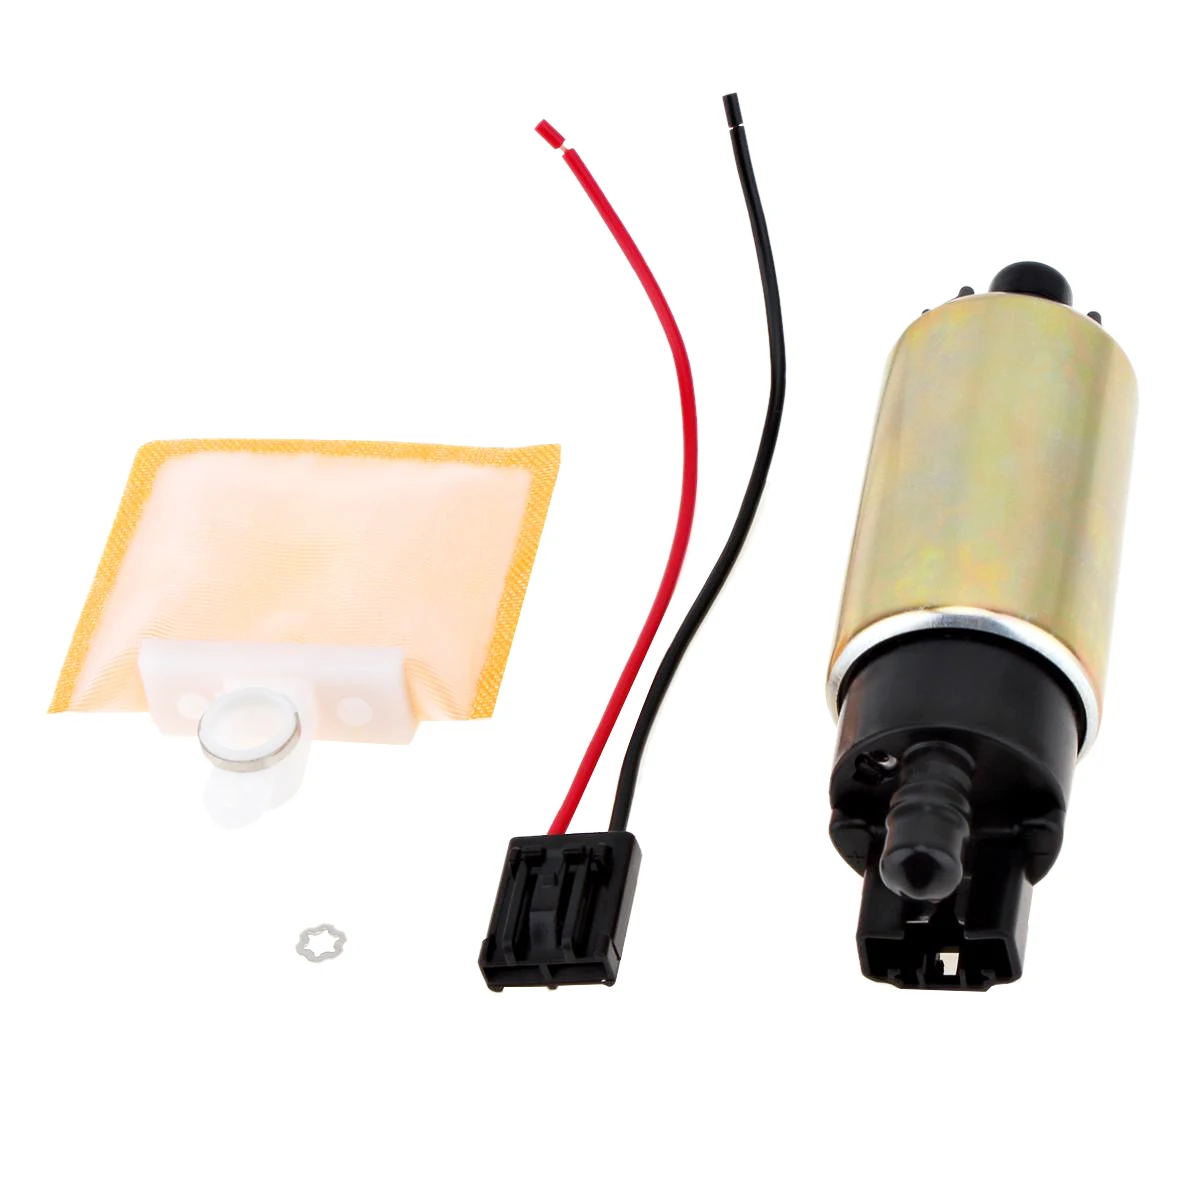 

120L/H High Performance Car Electric Gasoline Fuel Pump & Strainer Install Kit for TOYOTA / Ford / Nissan / Honda